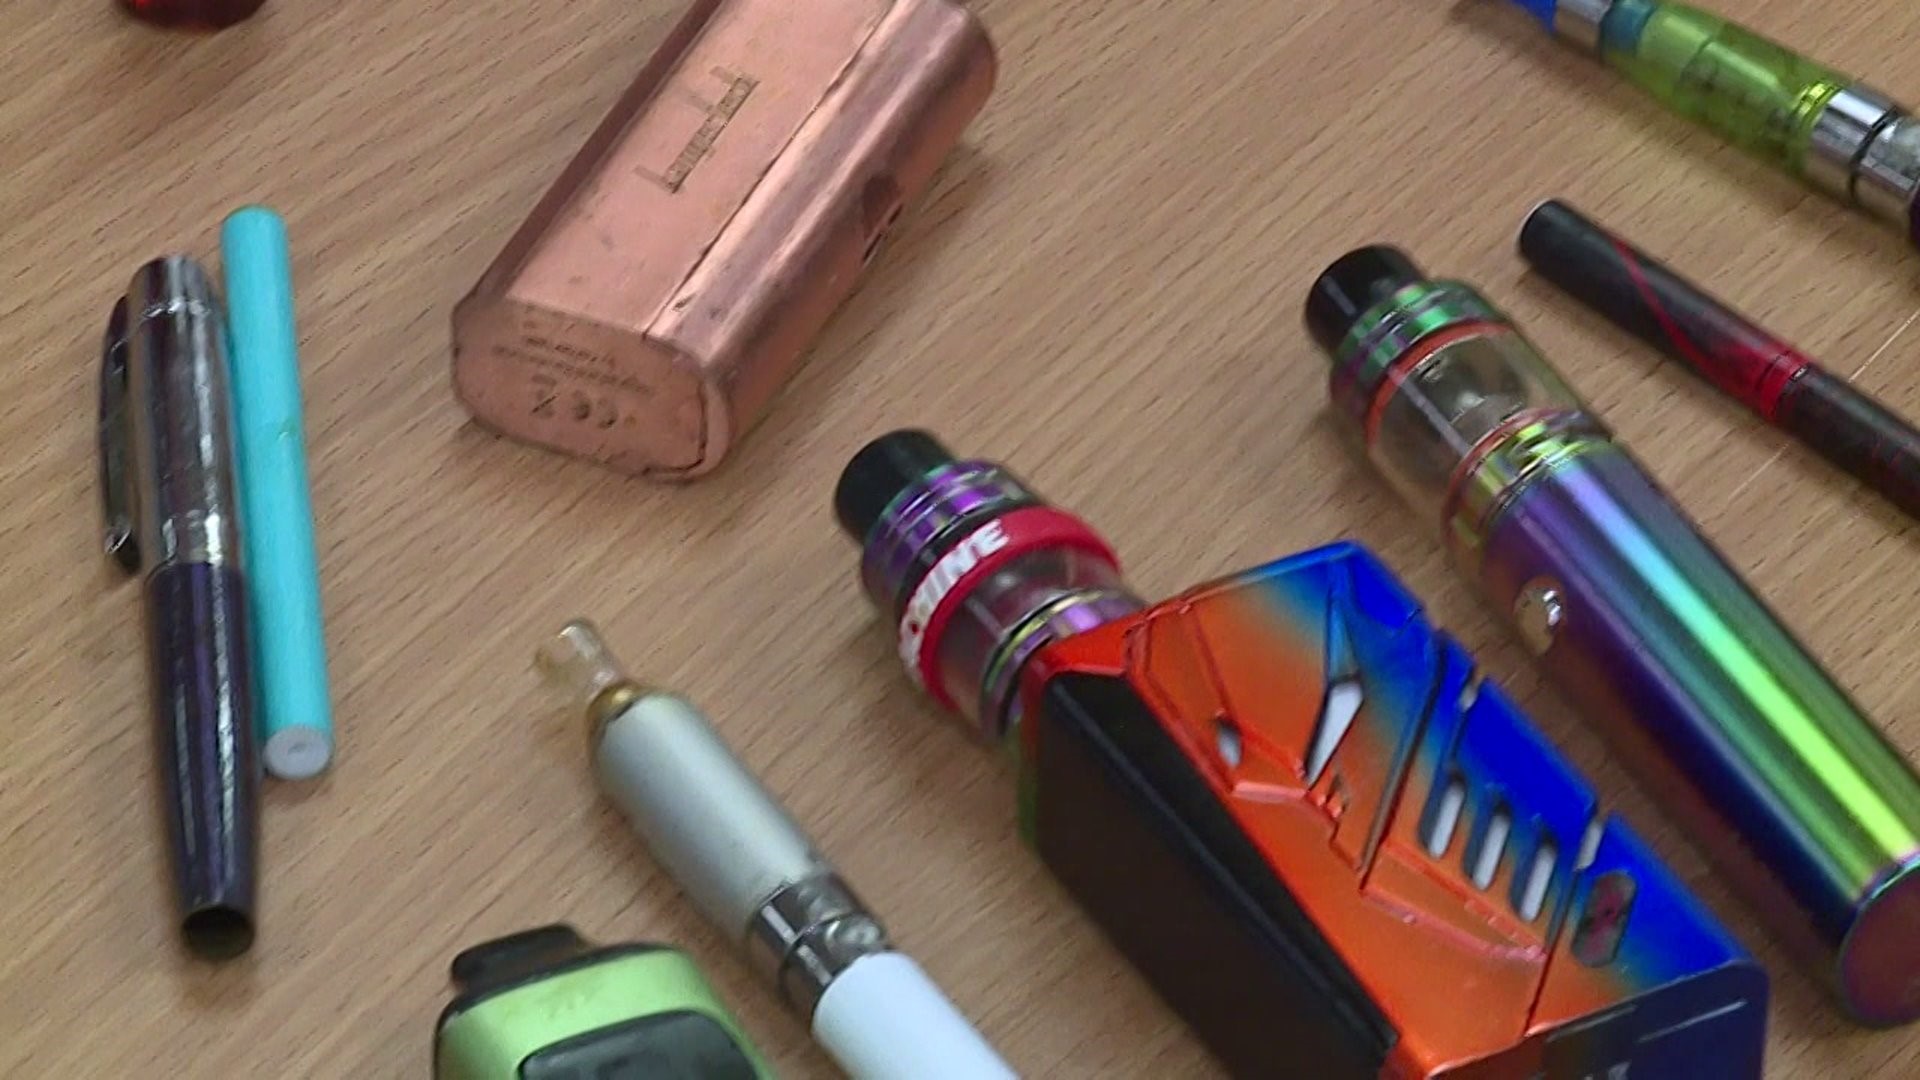 Hempfield School District works to educate students about dangers of vaping